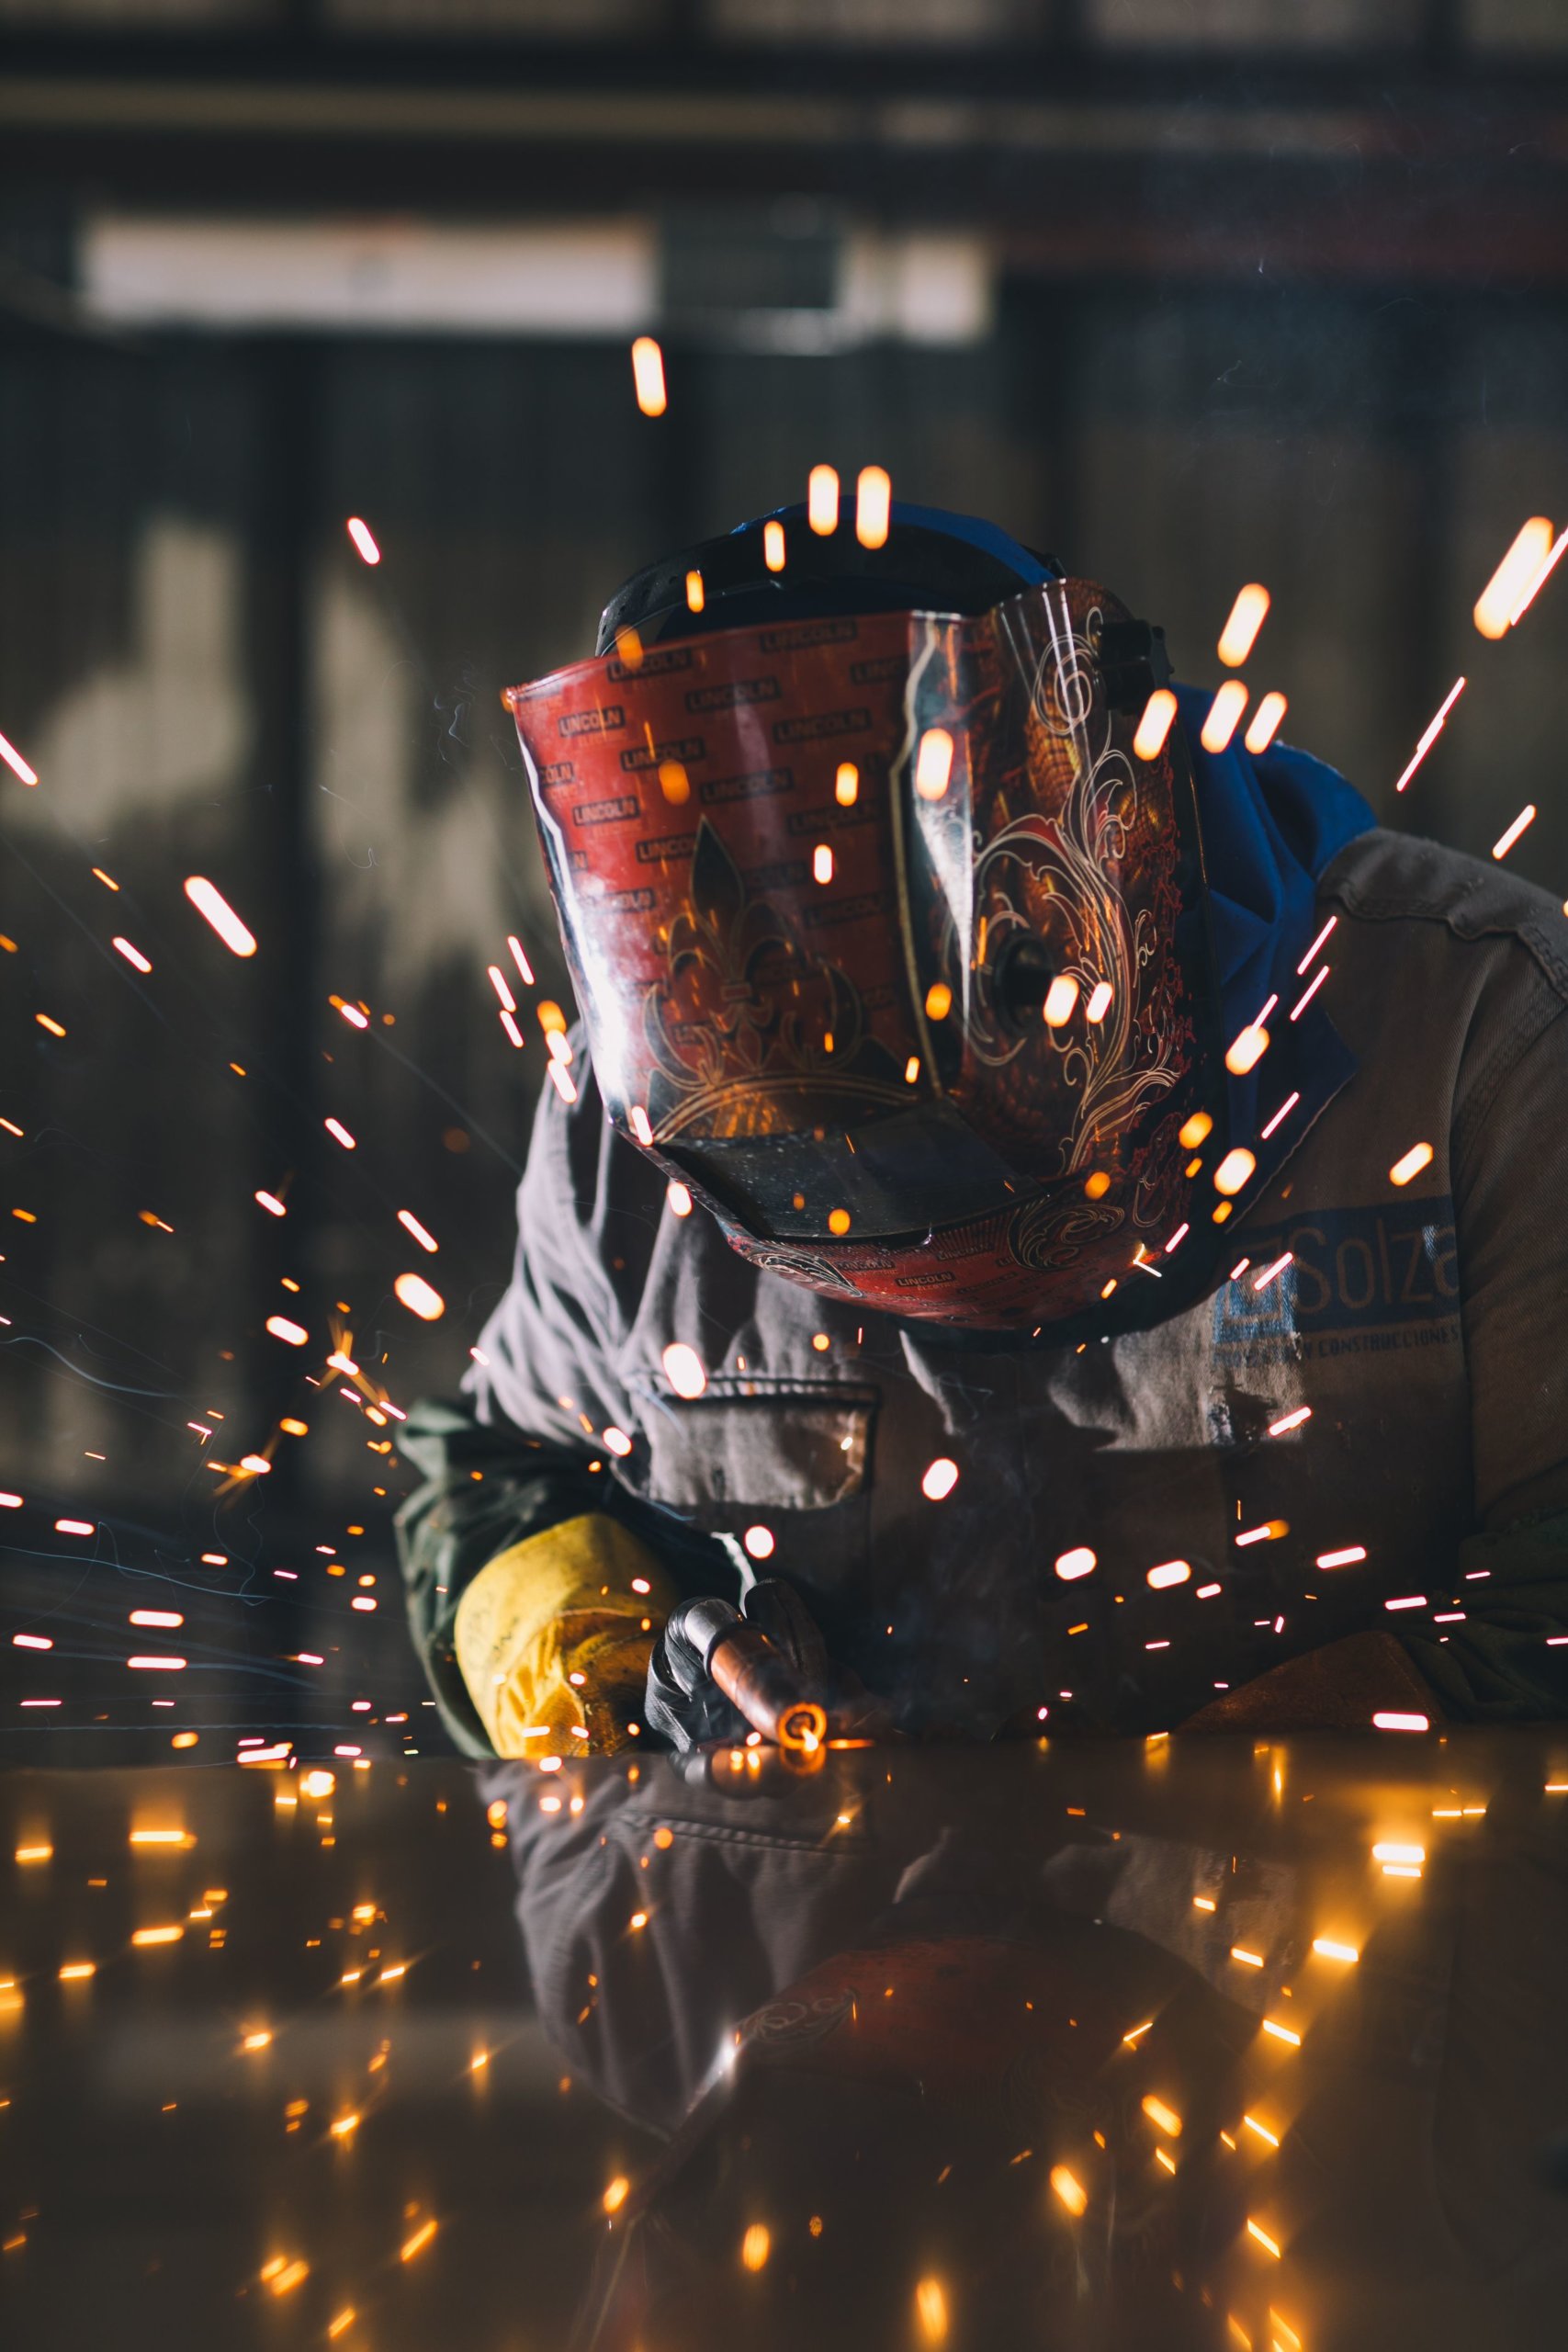 Person welding and sparks flying.